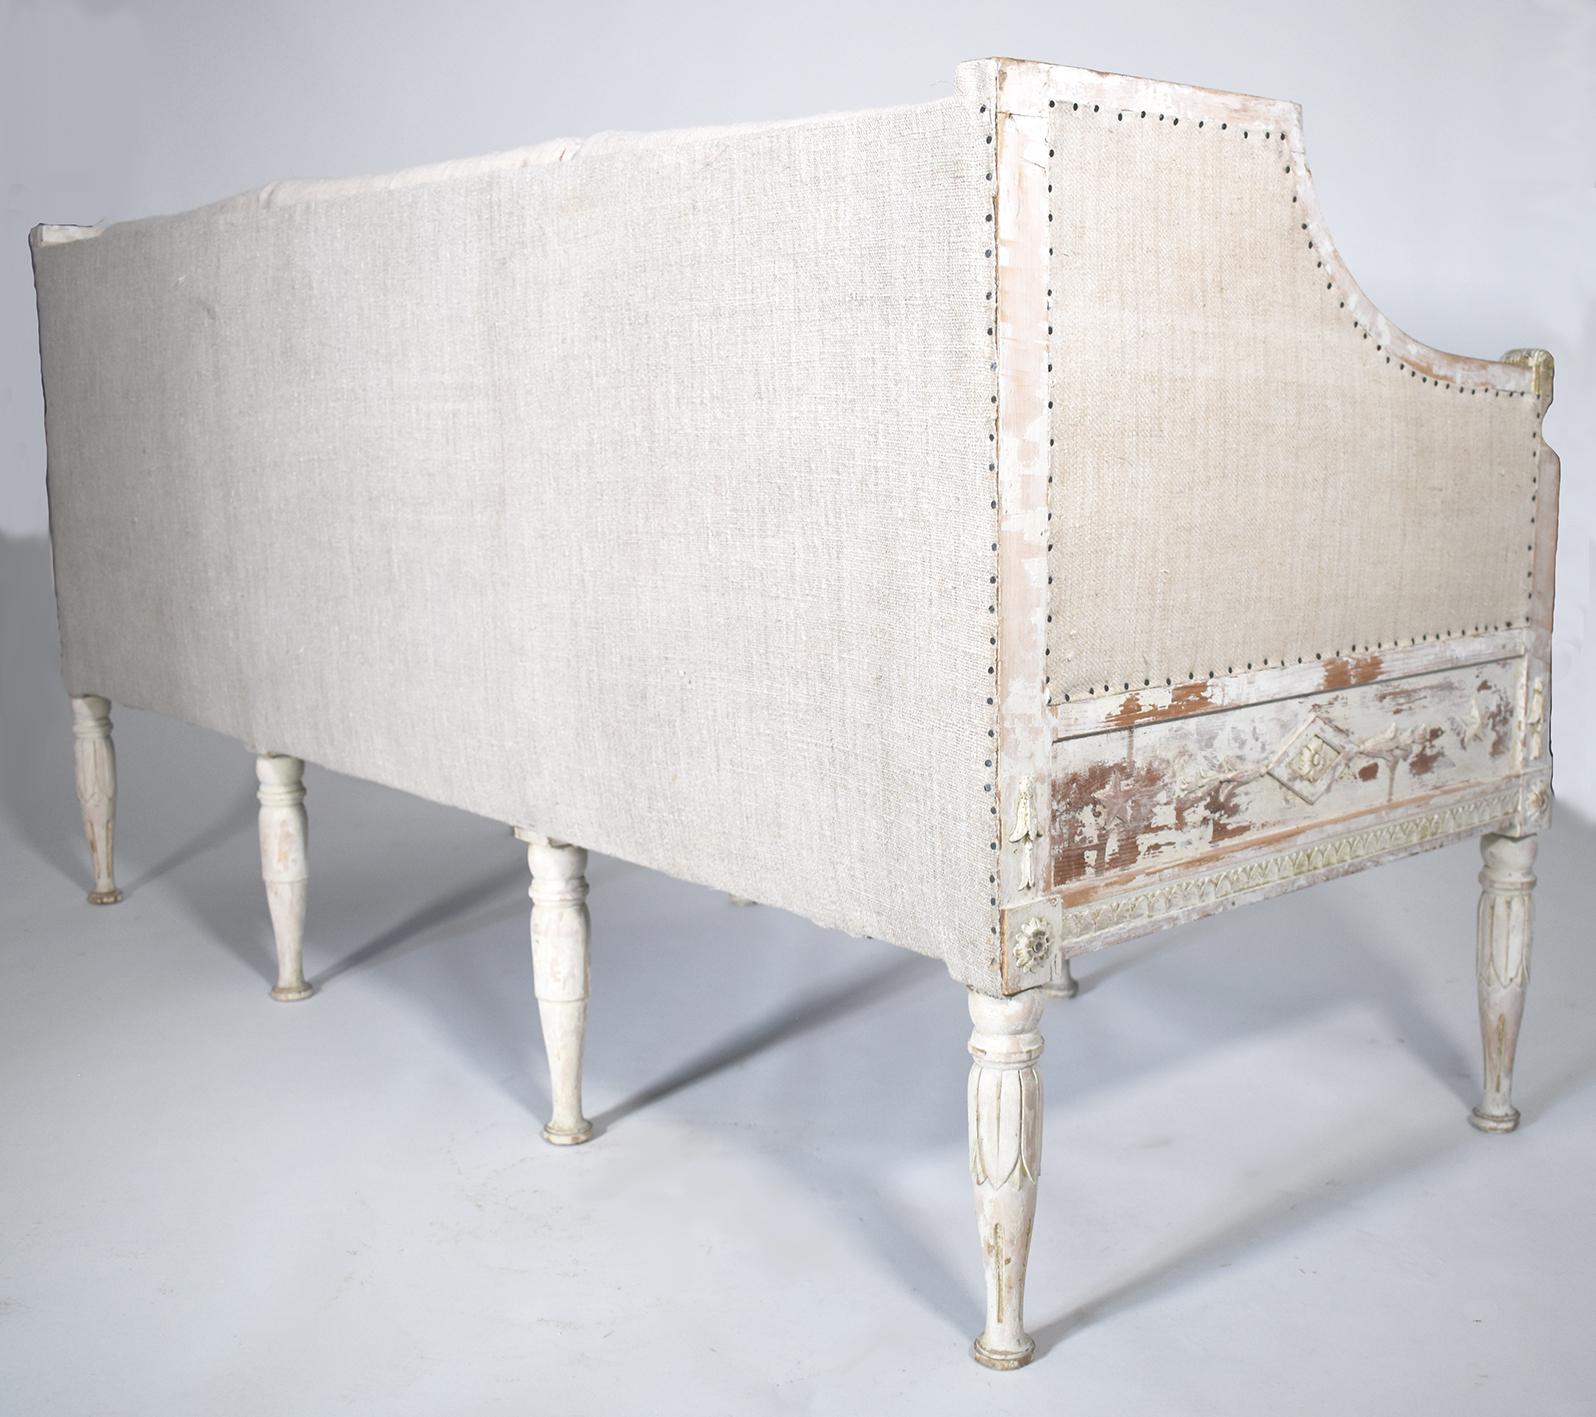 Hand-Carved 19th Century Swedish Banquette or Sofa with Egyptian Influence